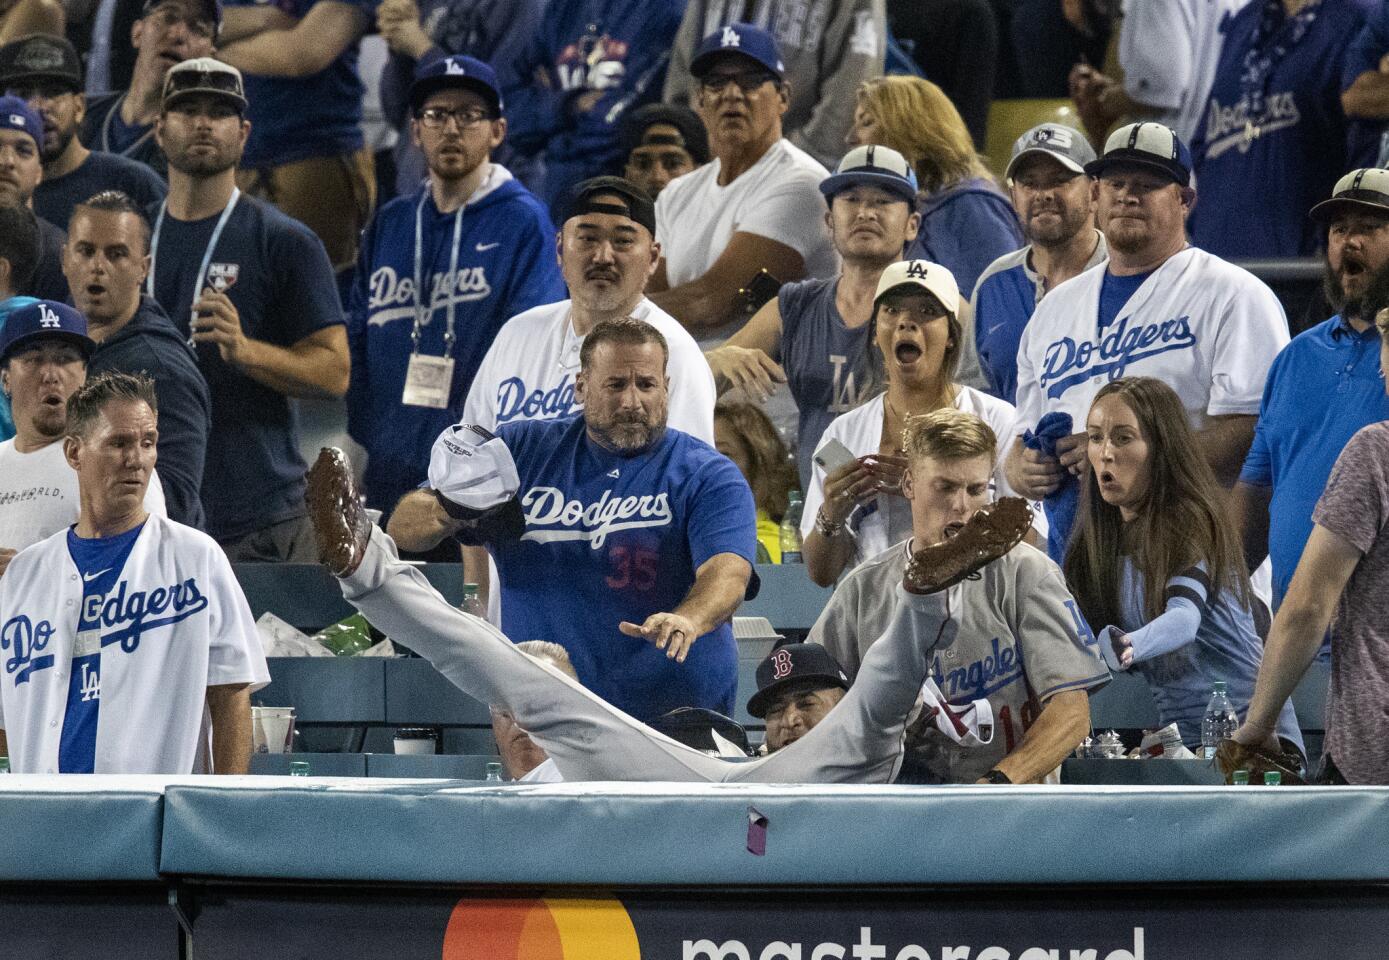 Red Sox third baseman Eduardo Nunez falls into the stands after catching a foul ball hit by Dodgers center fielder Cody Bellinger in the 13th inning.